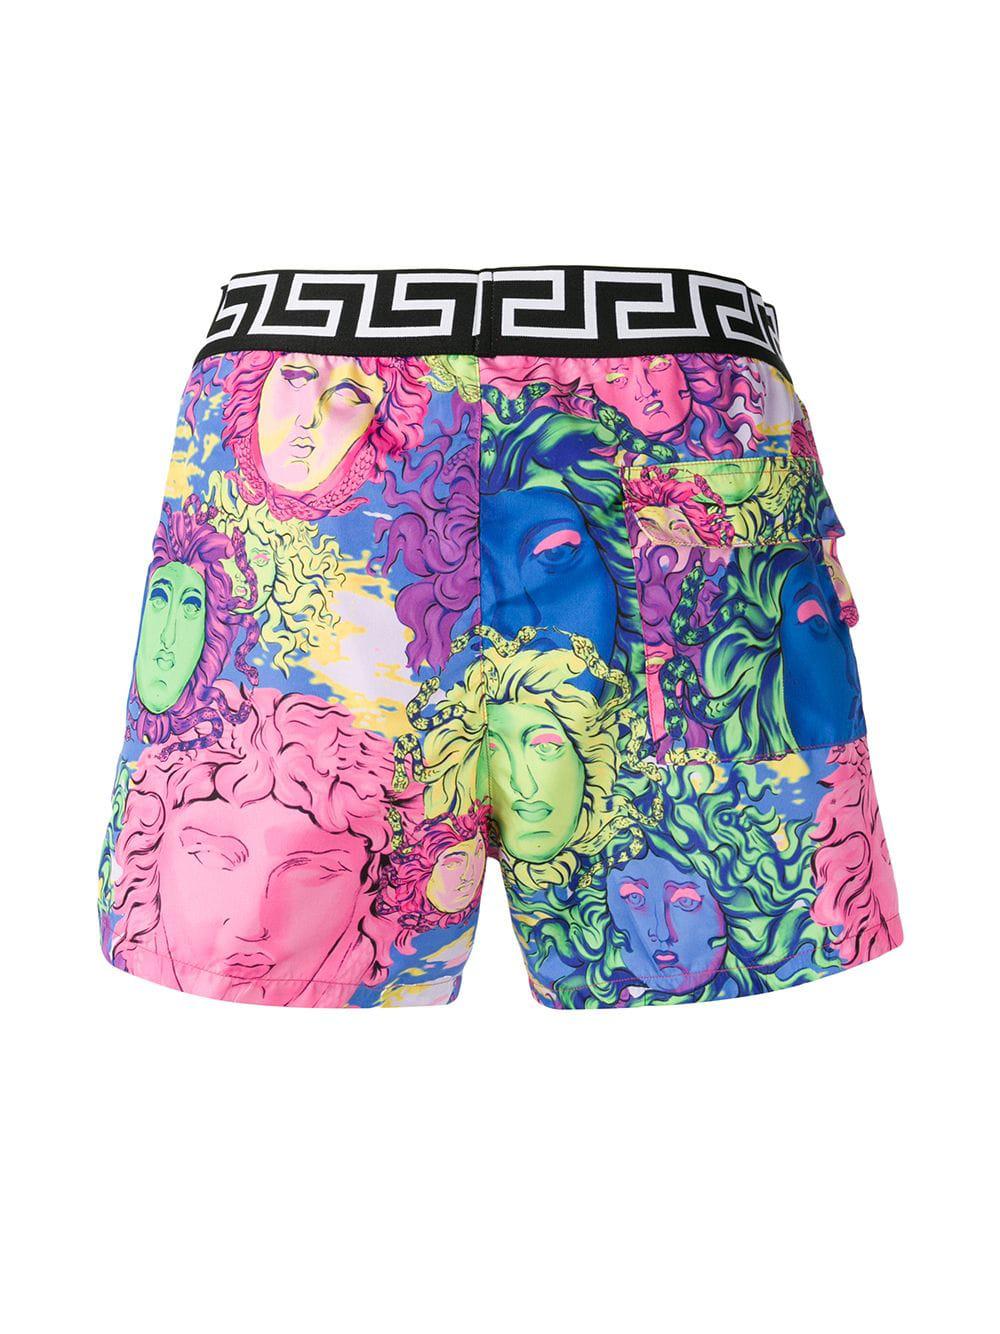 Versace Synthetic Medusa Print Swim Shorts in Pink for Men - Lyst